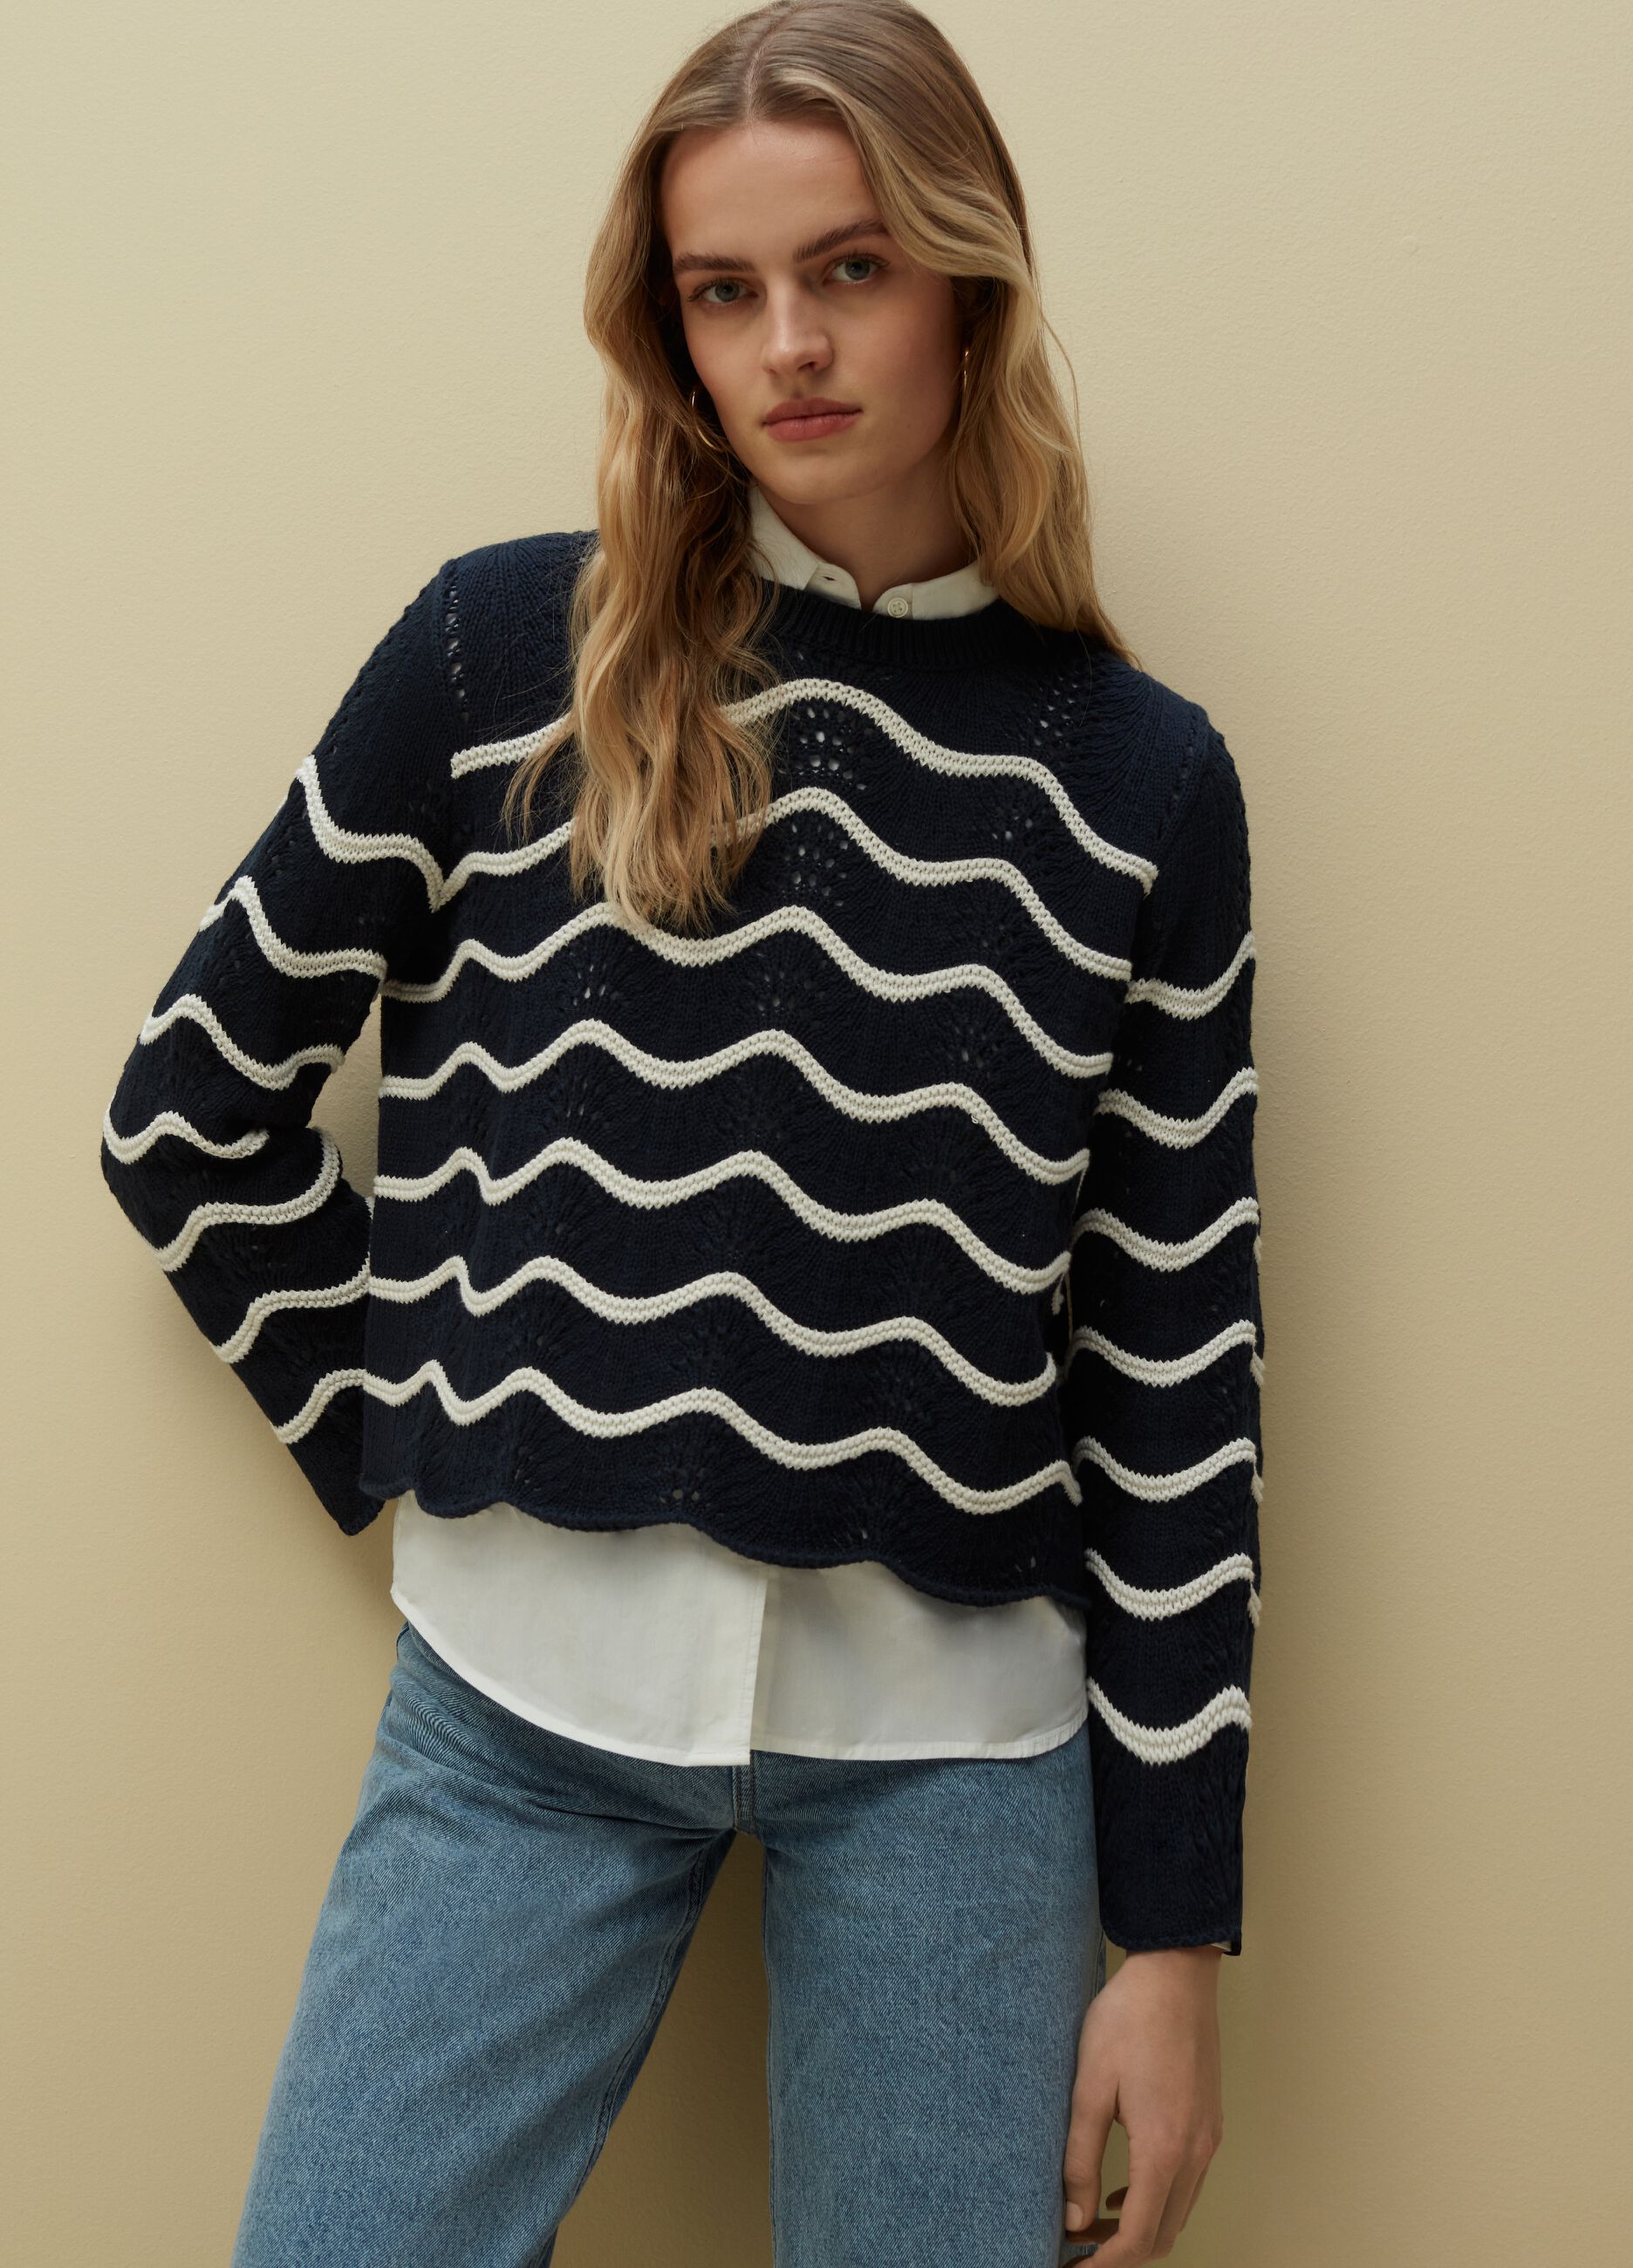 Crochet sweater with waved stripes